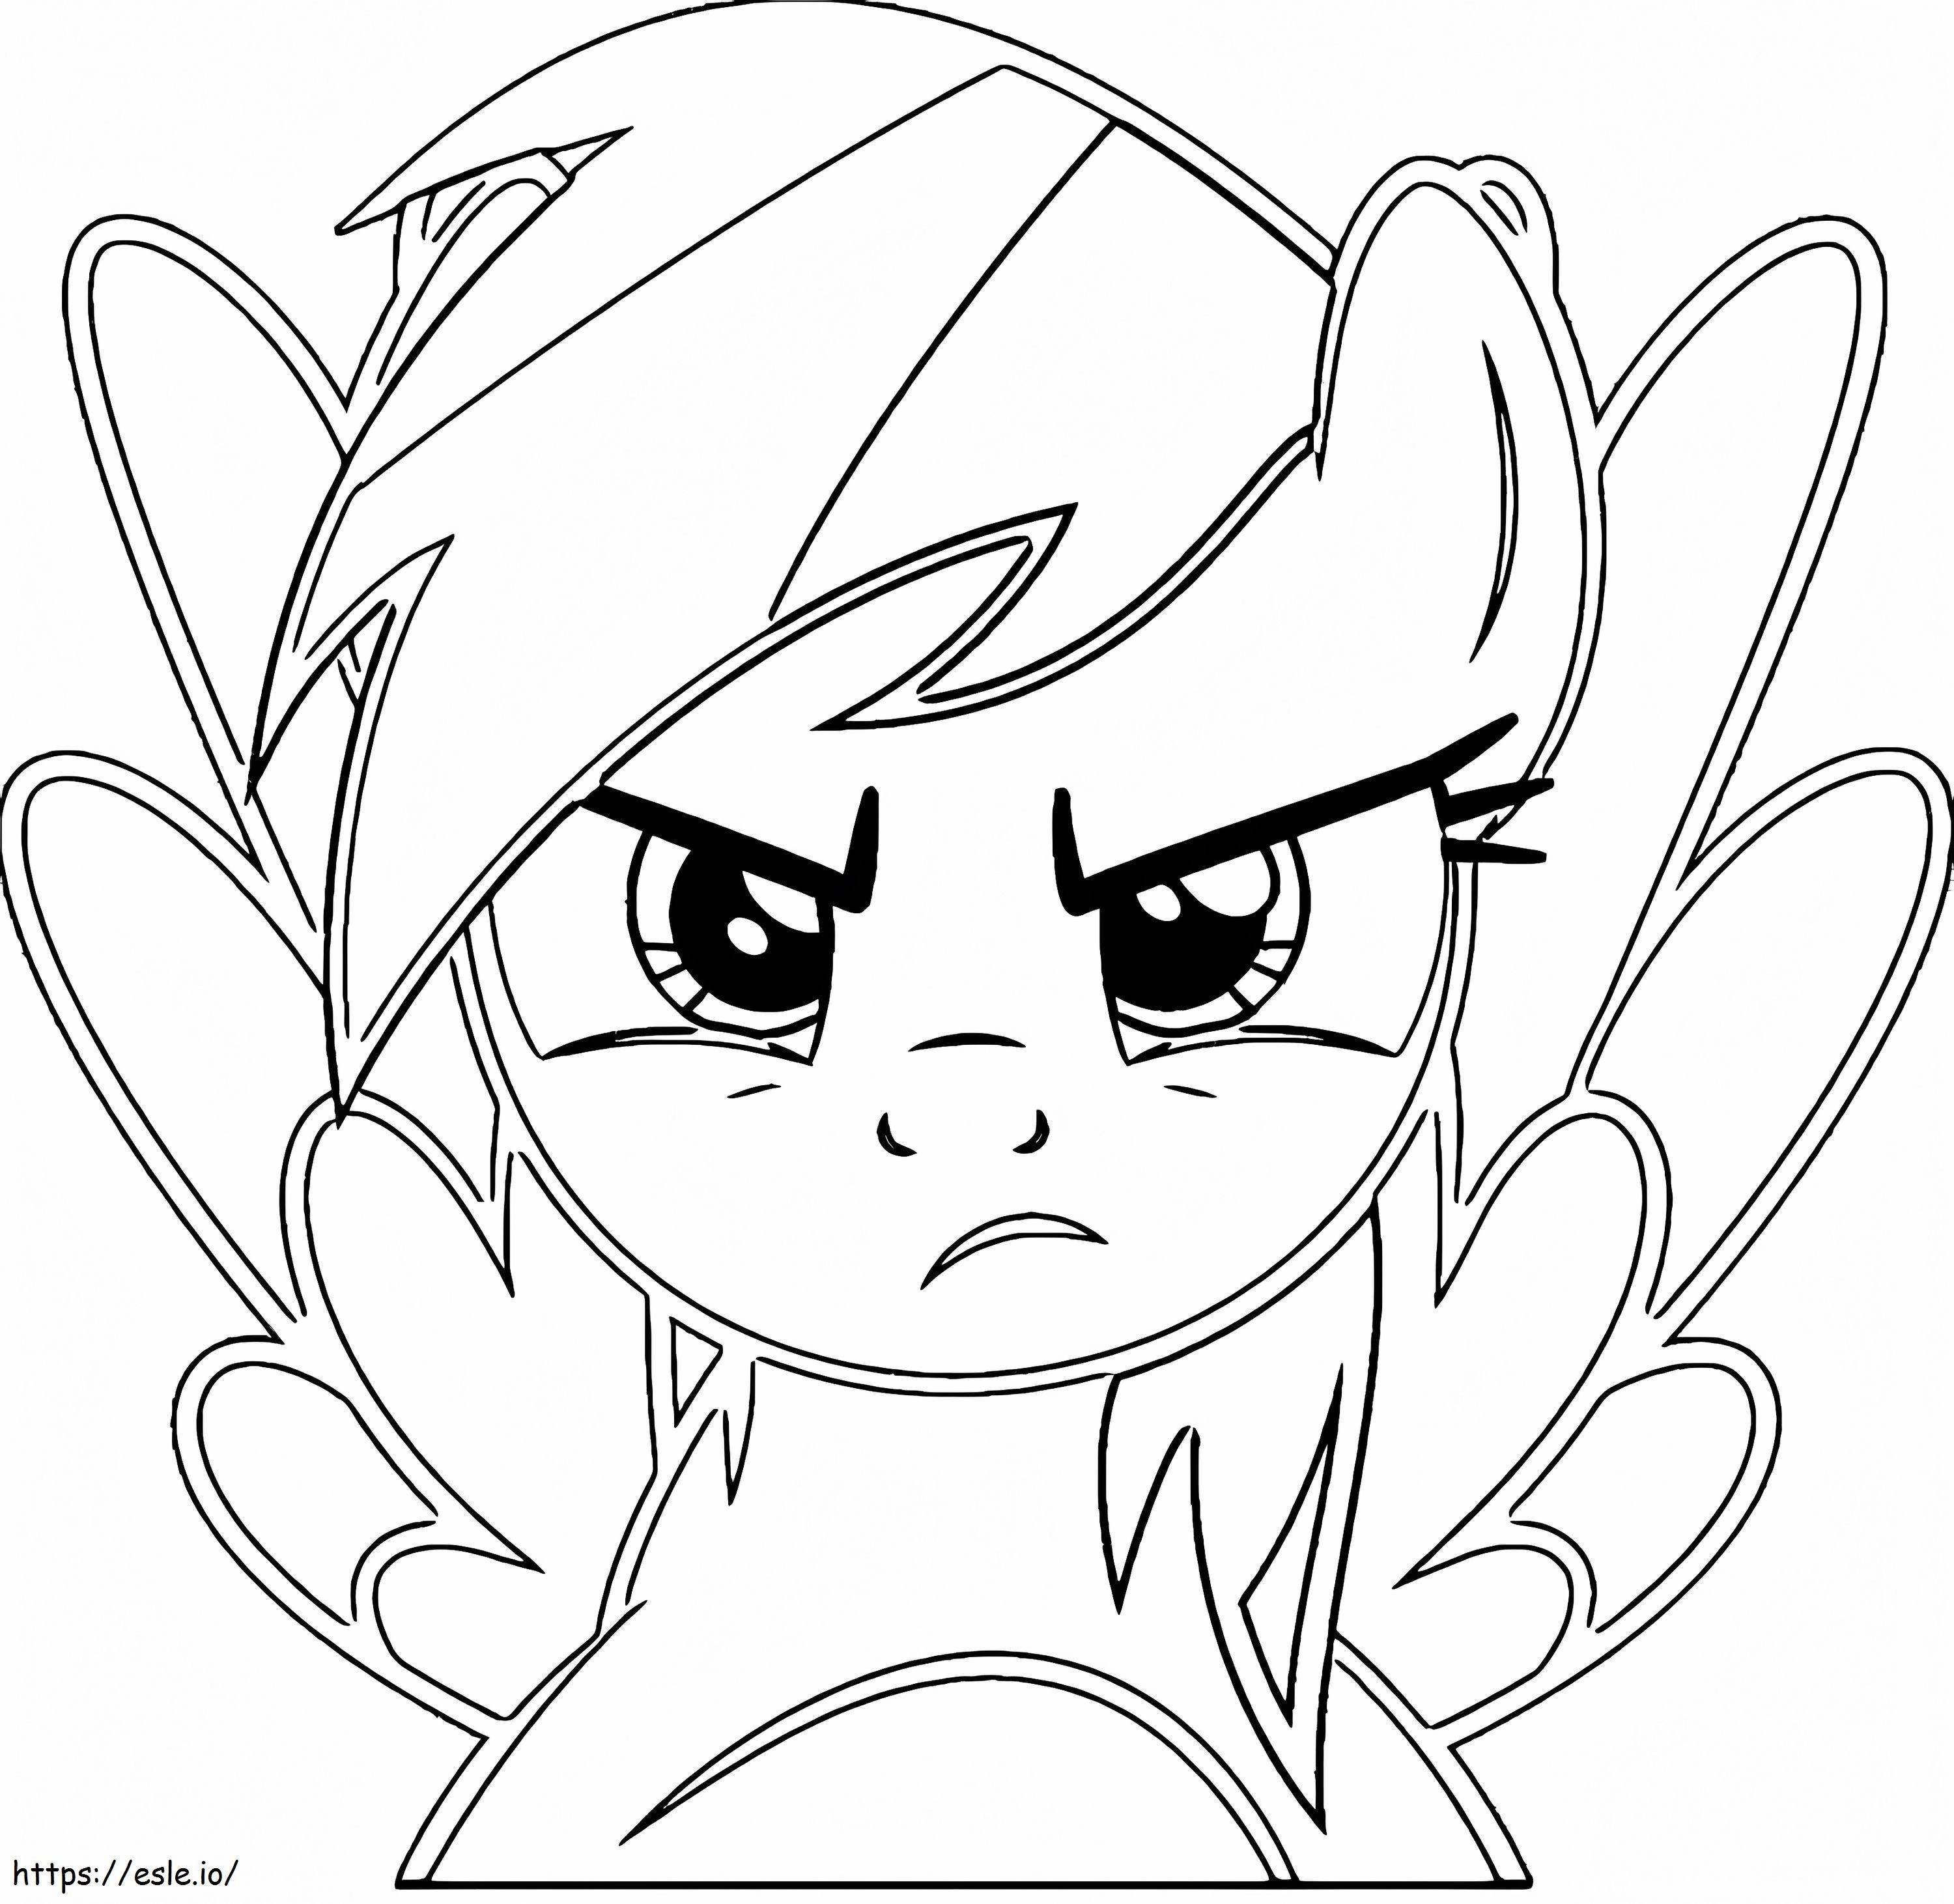 Rainbow Dash Is Angry coloring page